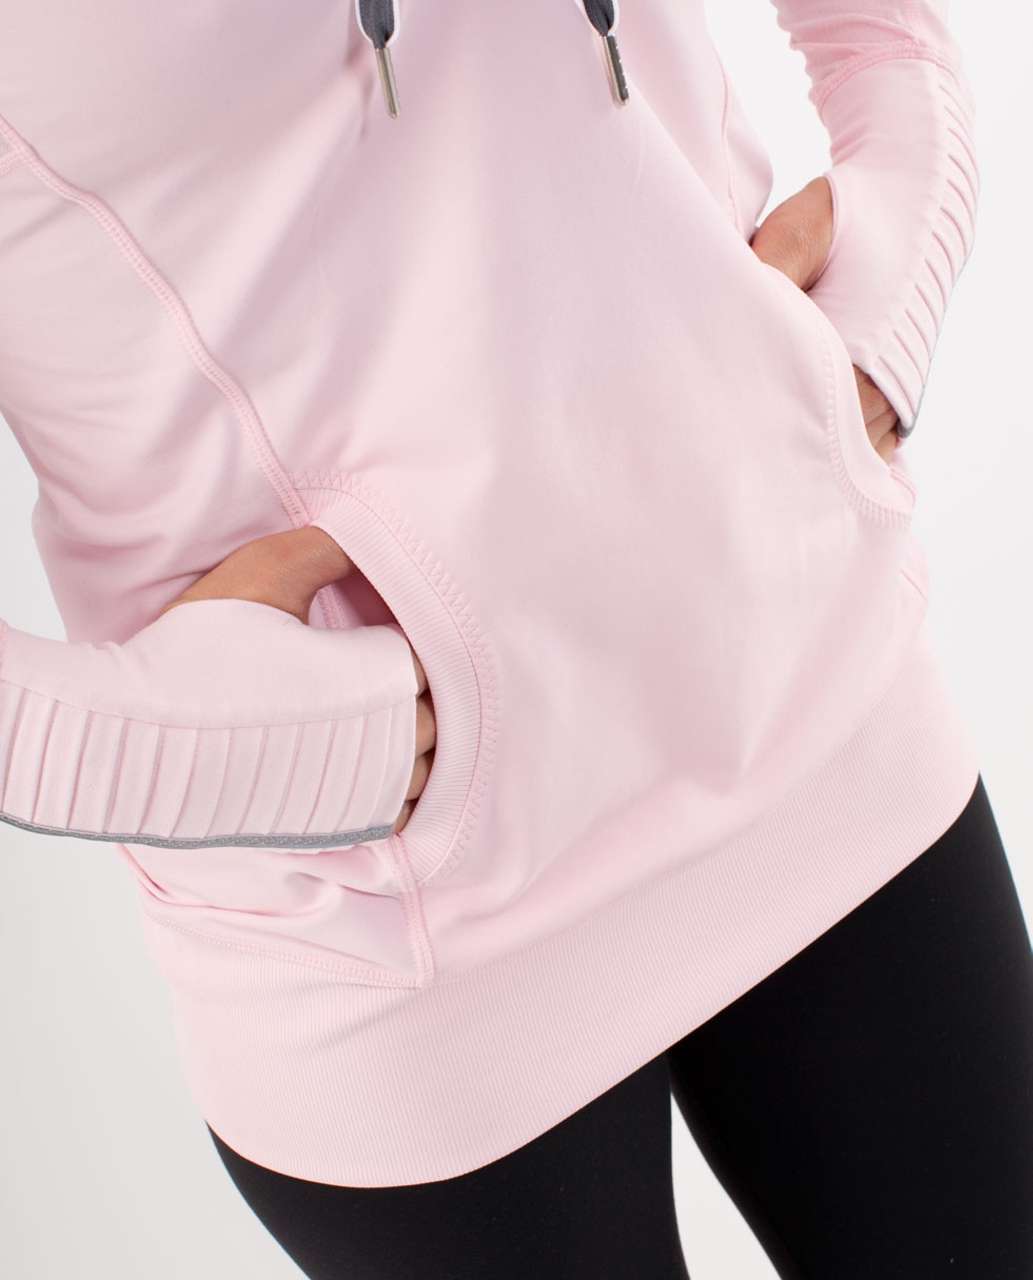 Lululemon Run:  Stay On Course Pullover - Pig Pink